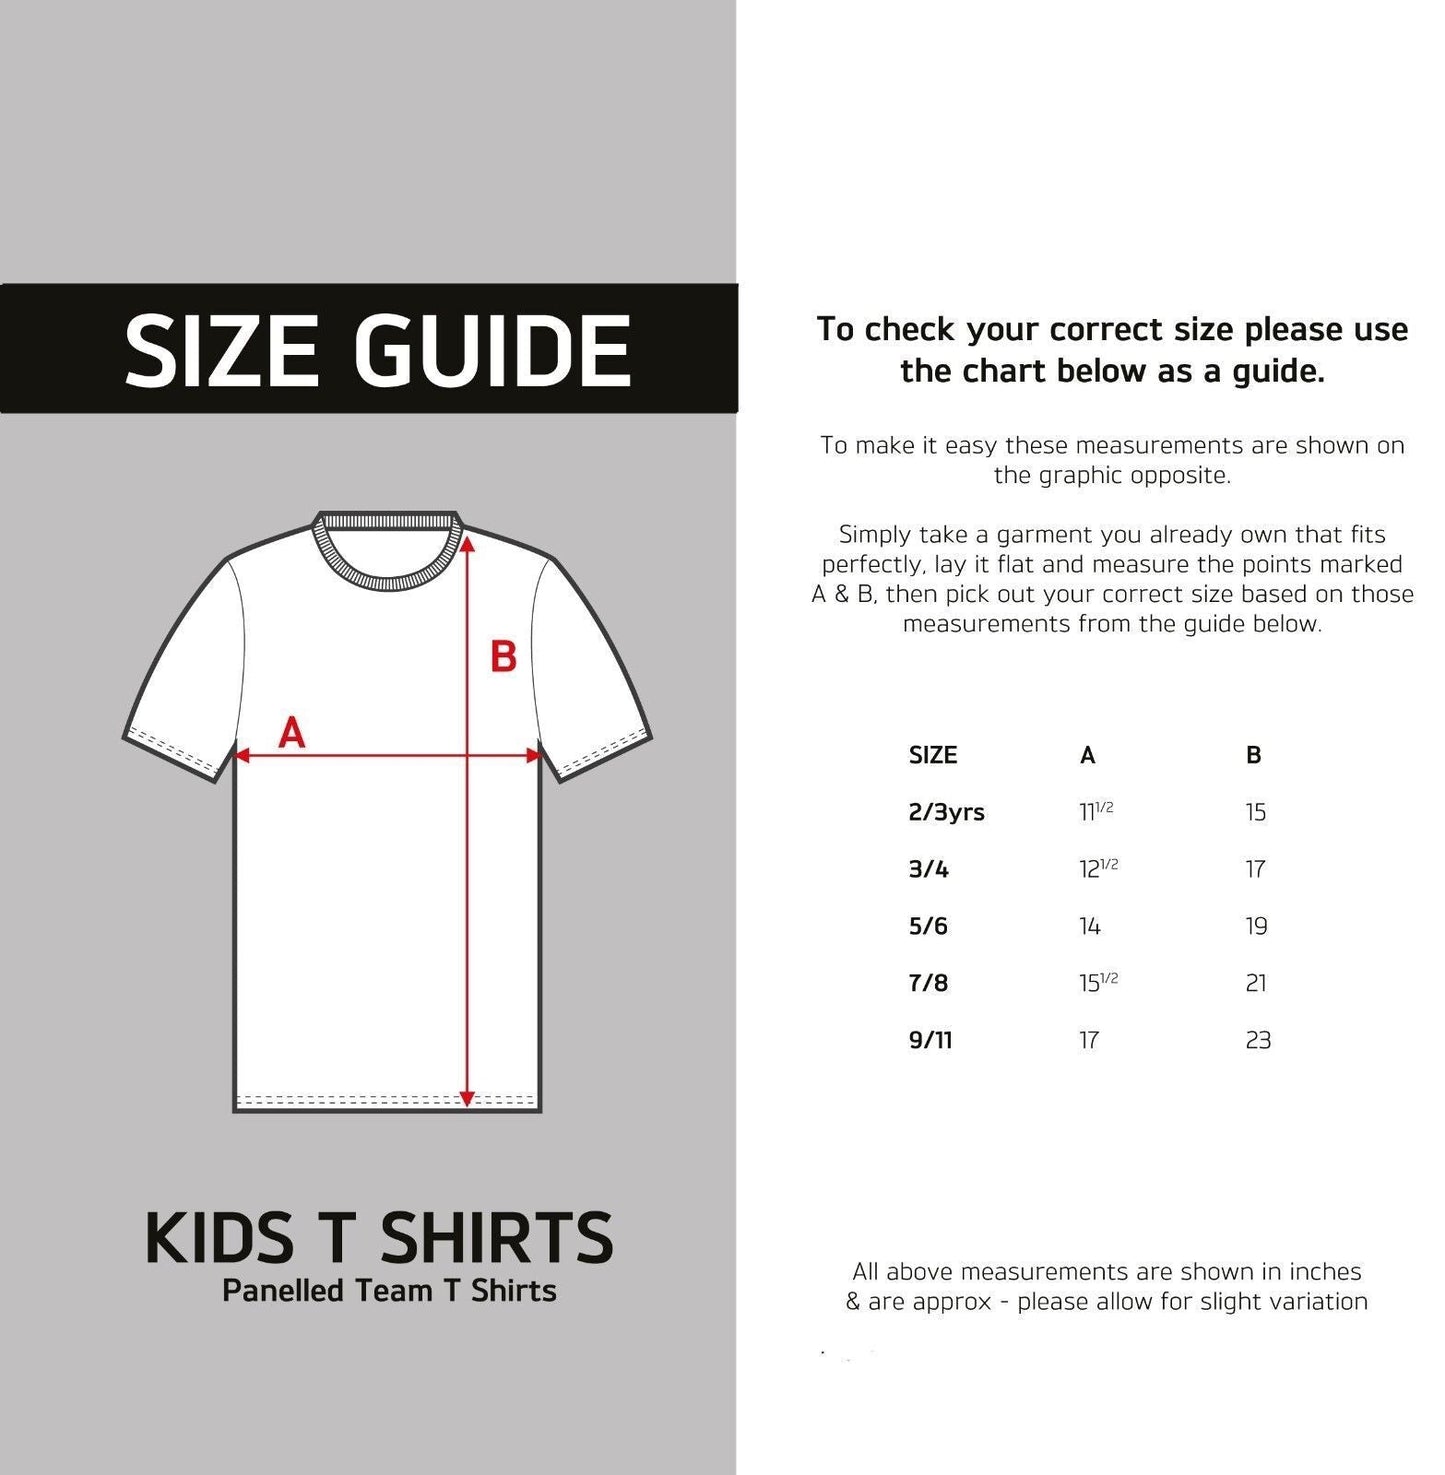 Official Tyco BMW Kid's T Shirt - 18Tb Kct